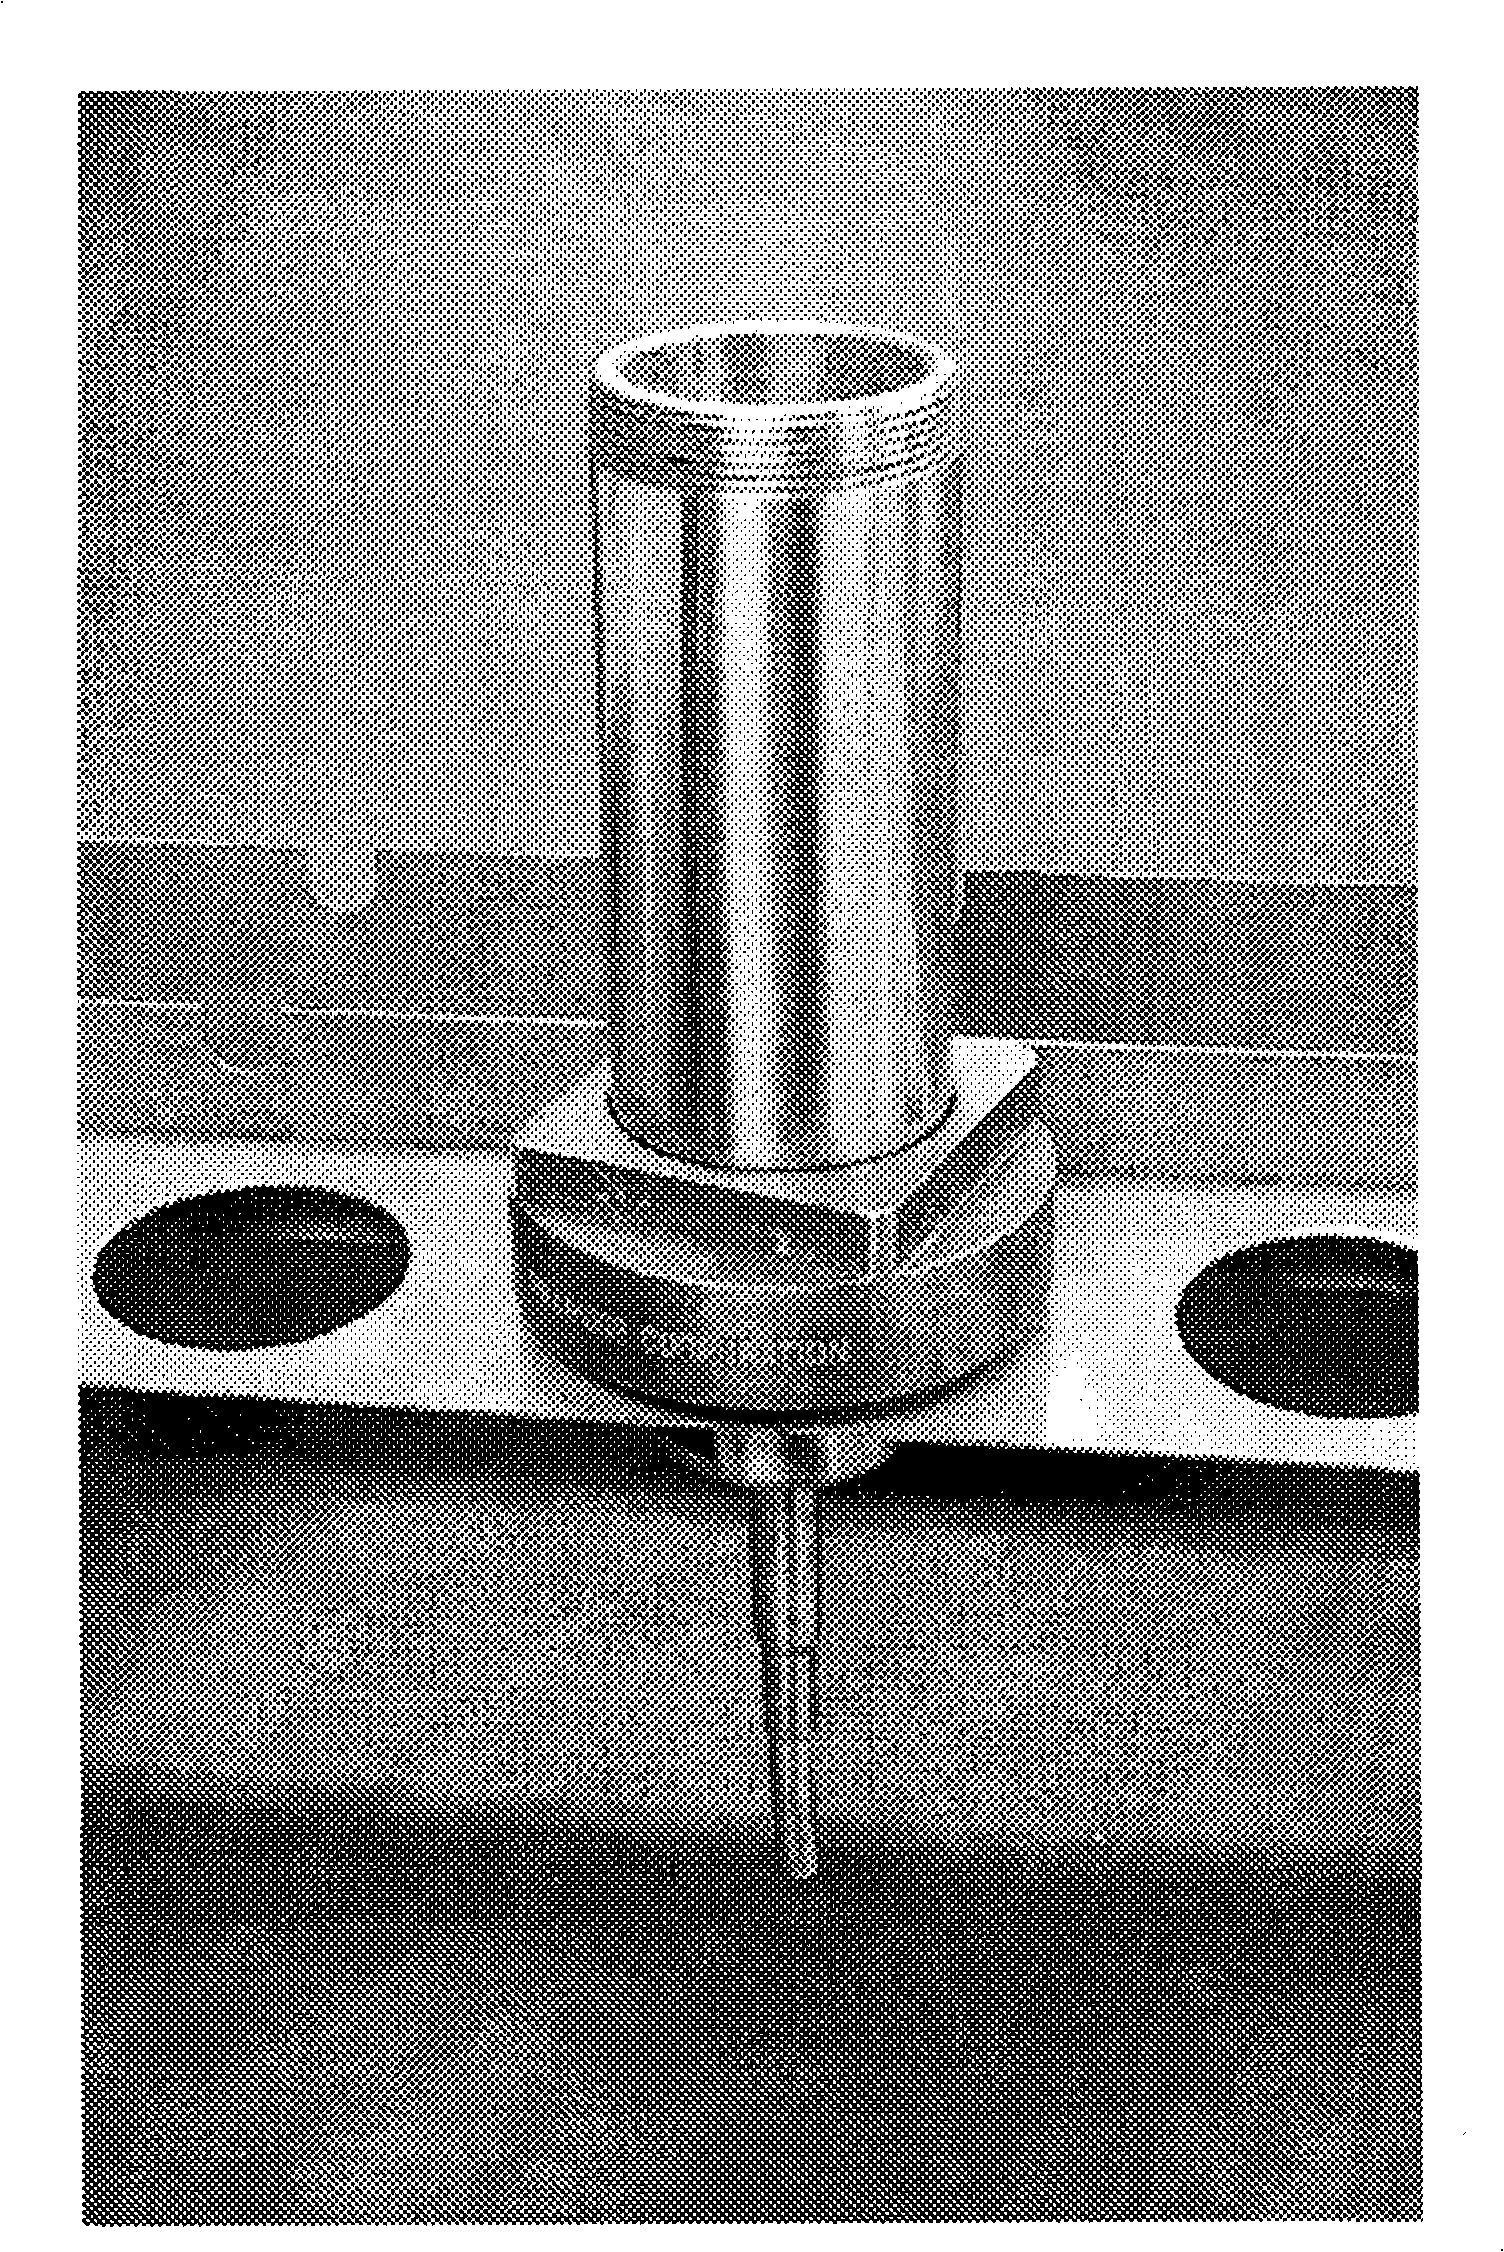 Filter for filtration collection of particles floating in water, and method for filtration collection of particles floating in water and method for control of water quality using the filter